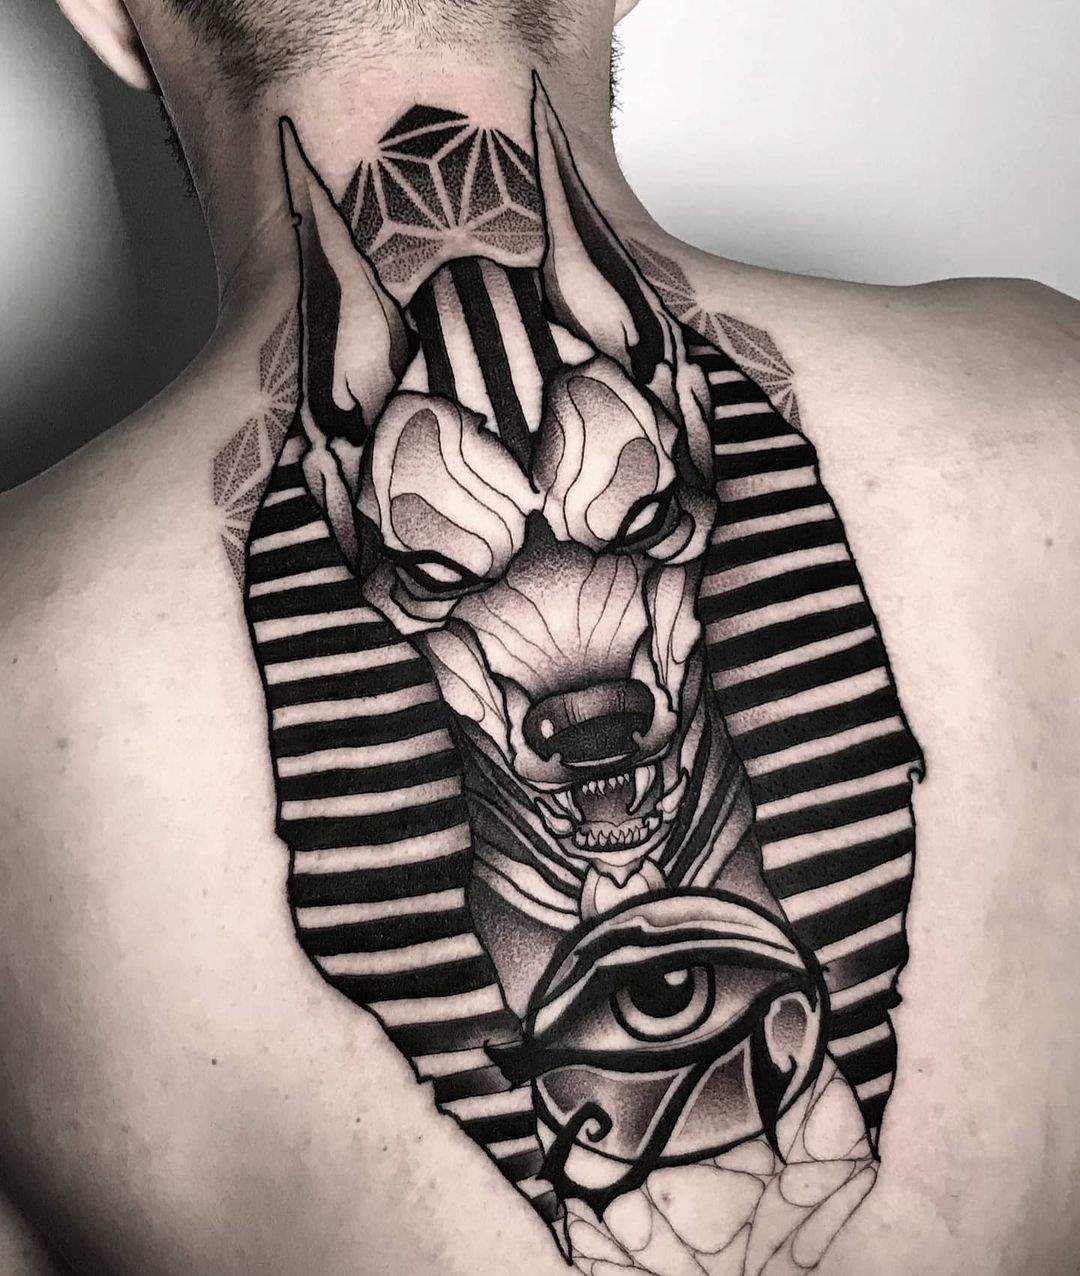 Find an artist that will understand exactly what you want your piece to look like.